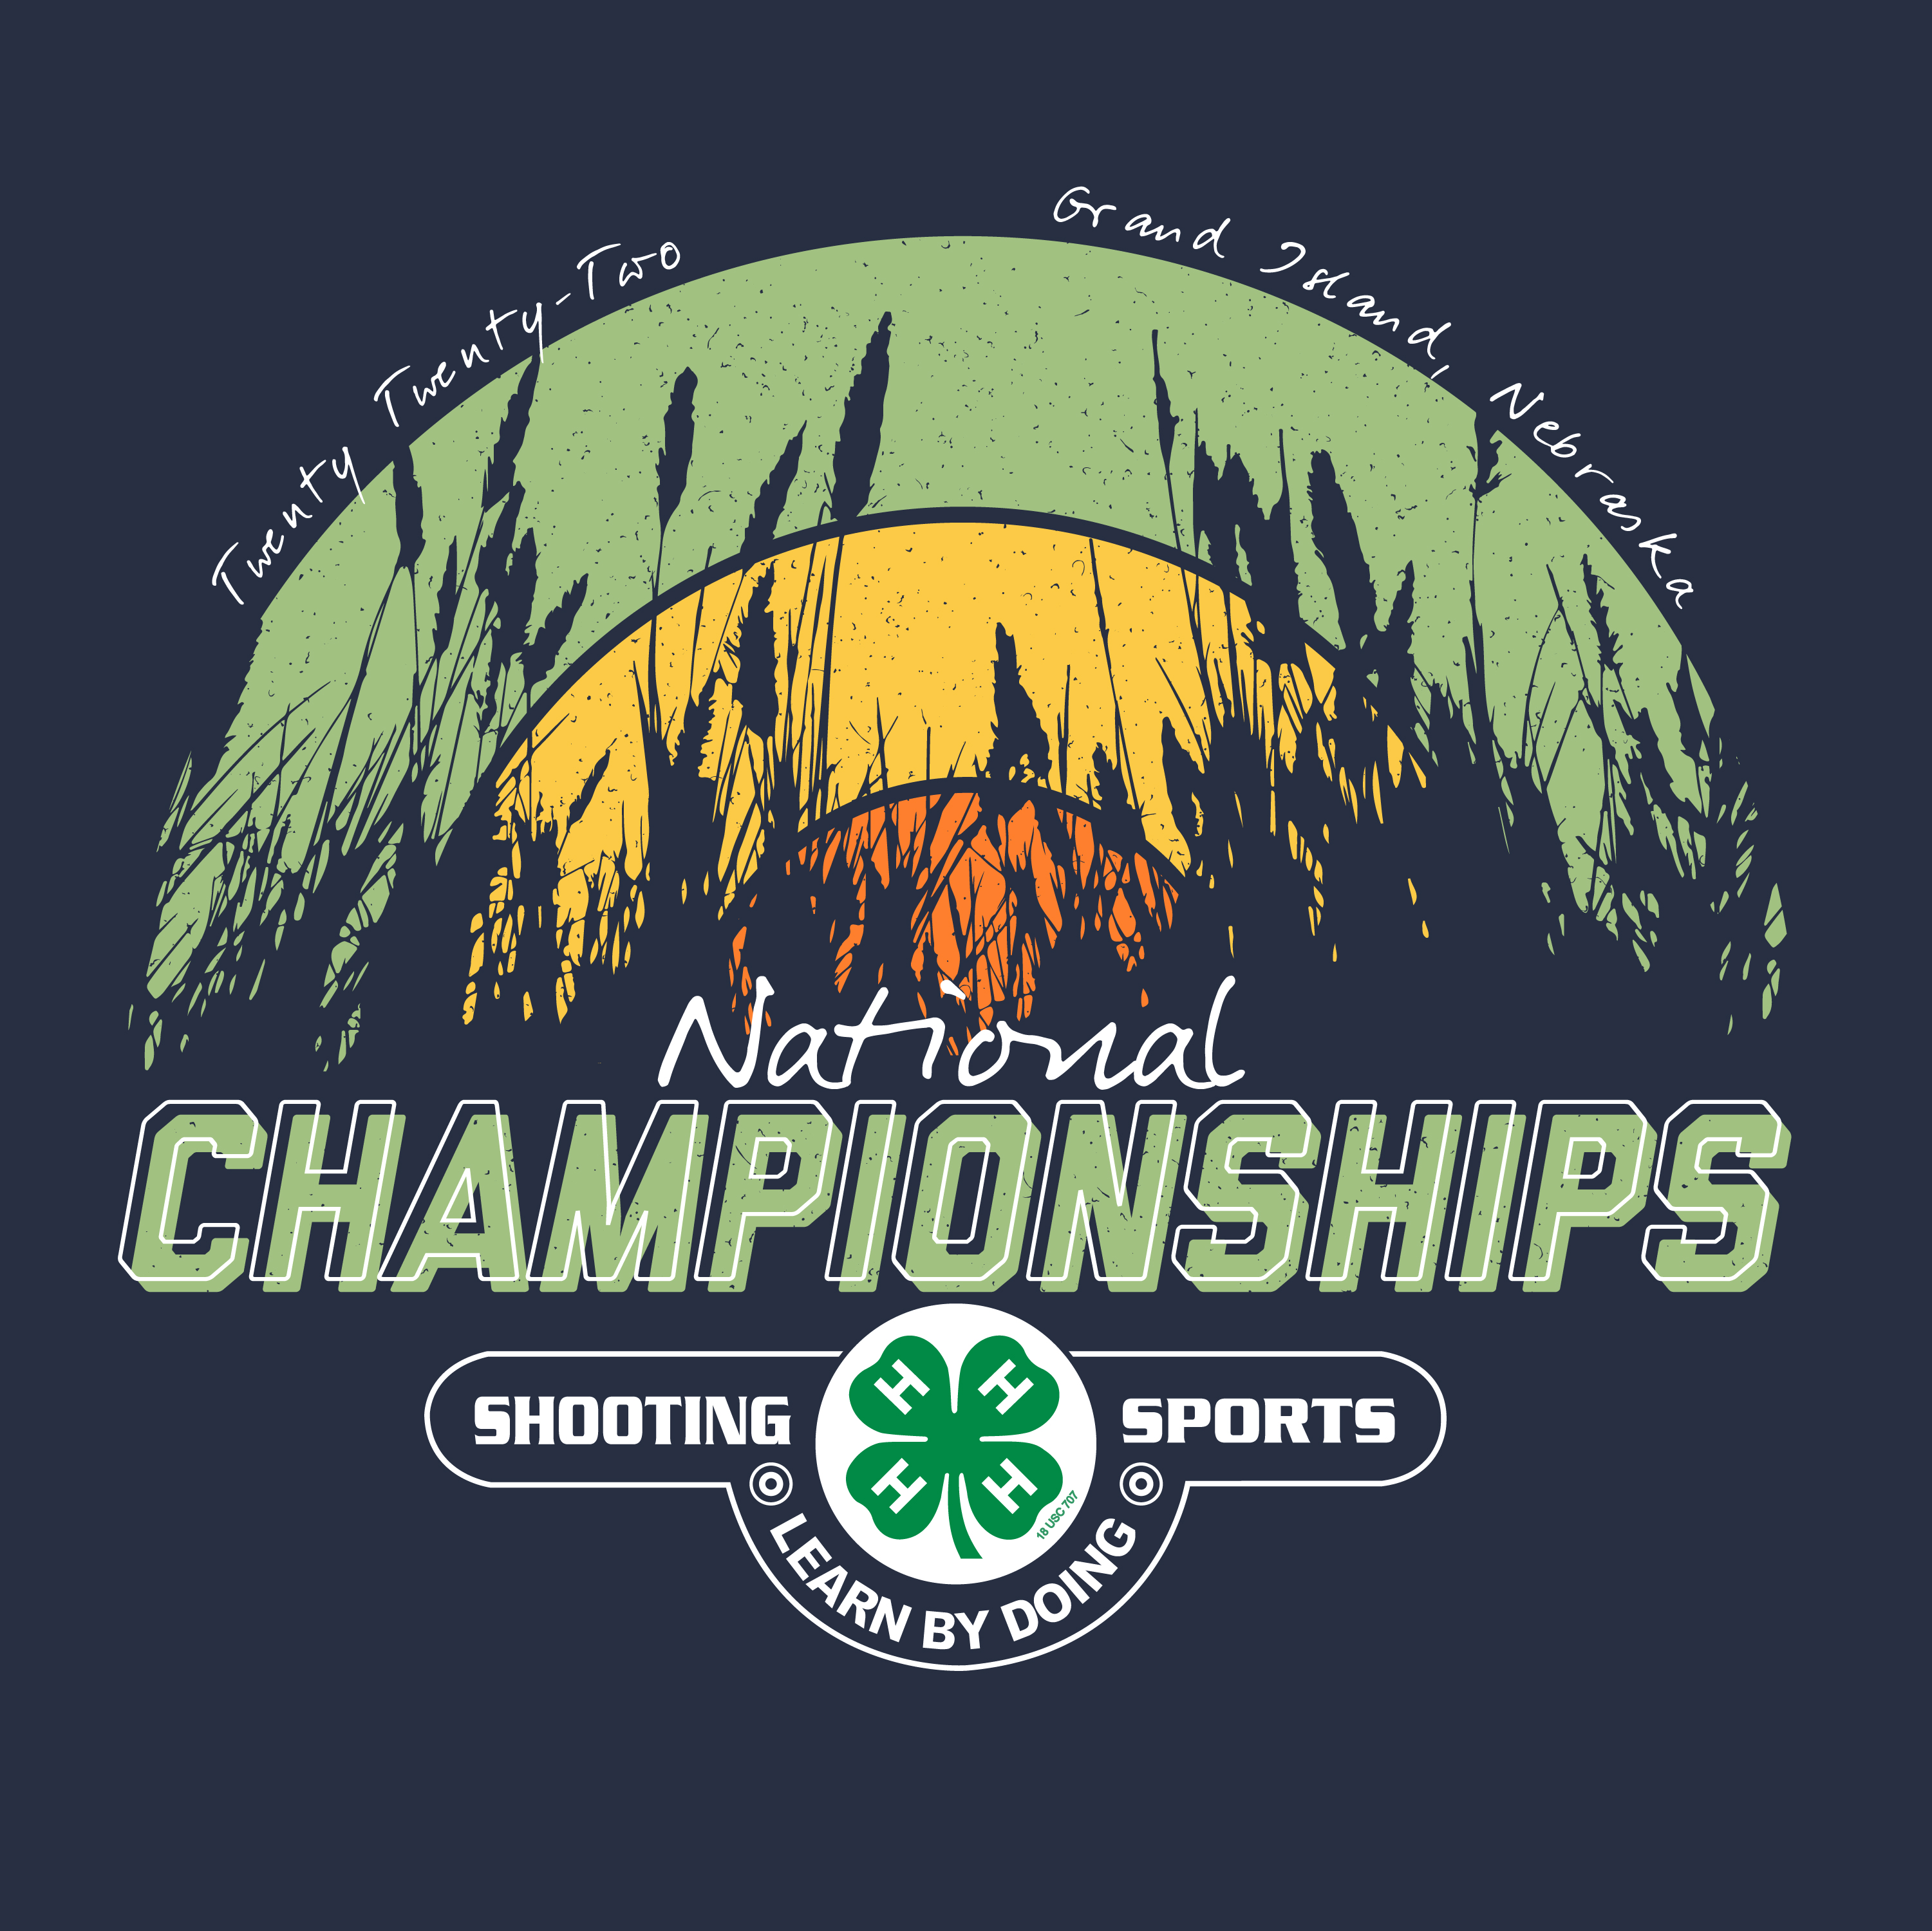 Twenty-two youth set to compete at 4-H Shooting Sports National Championships